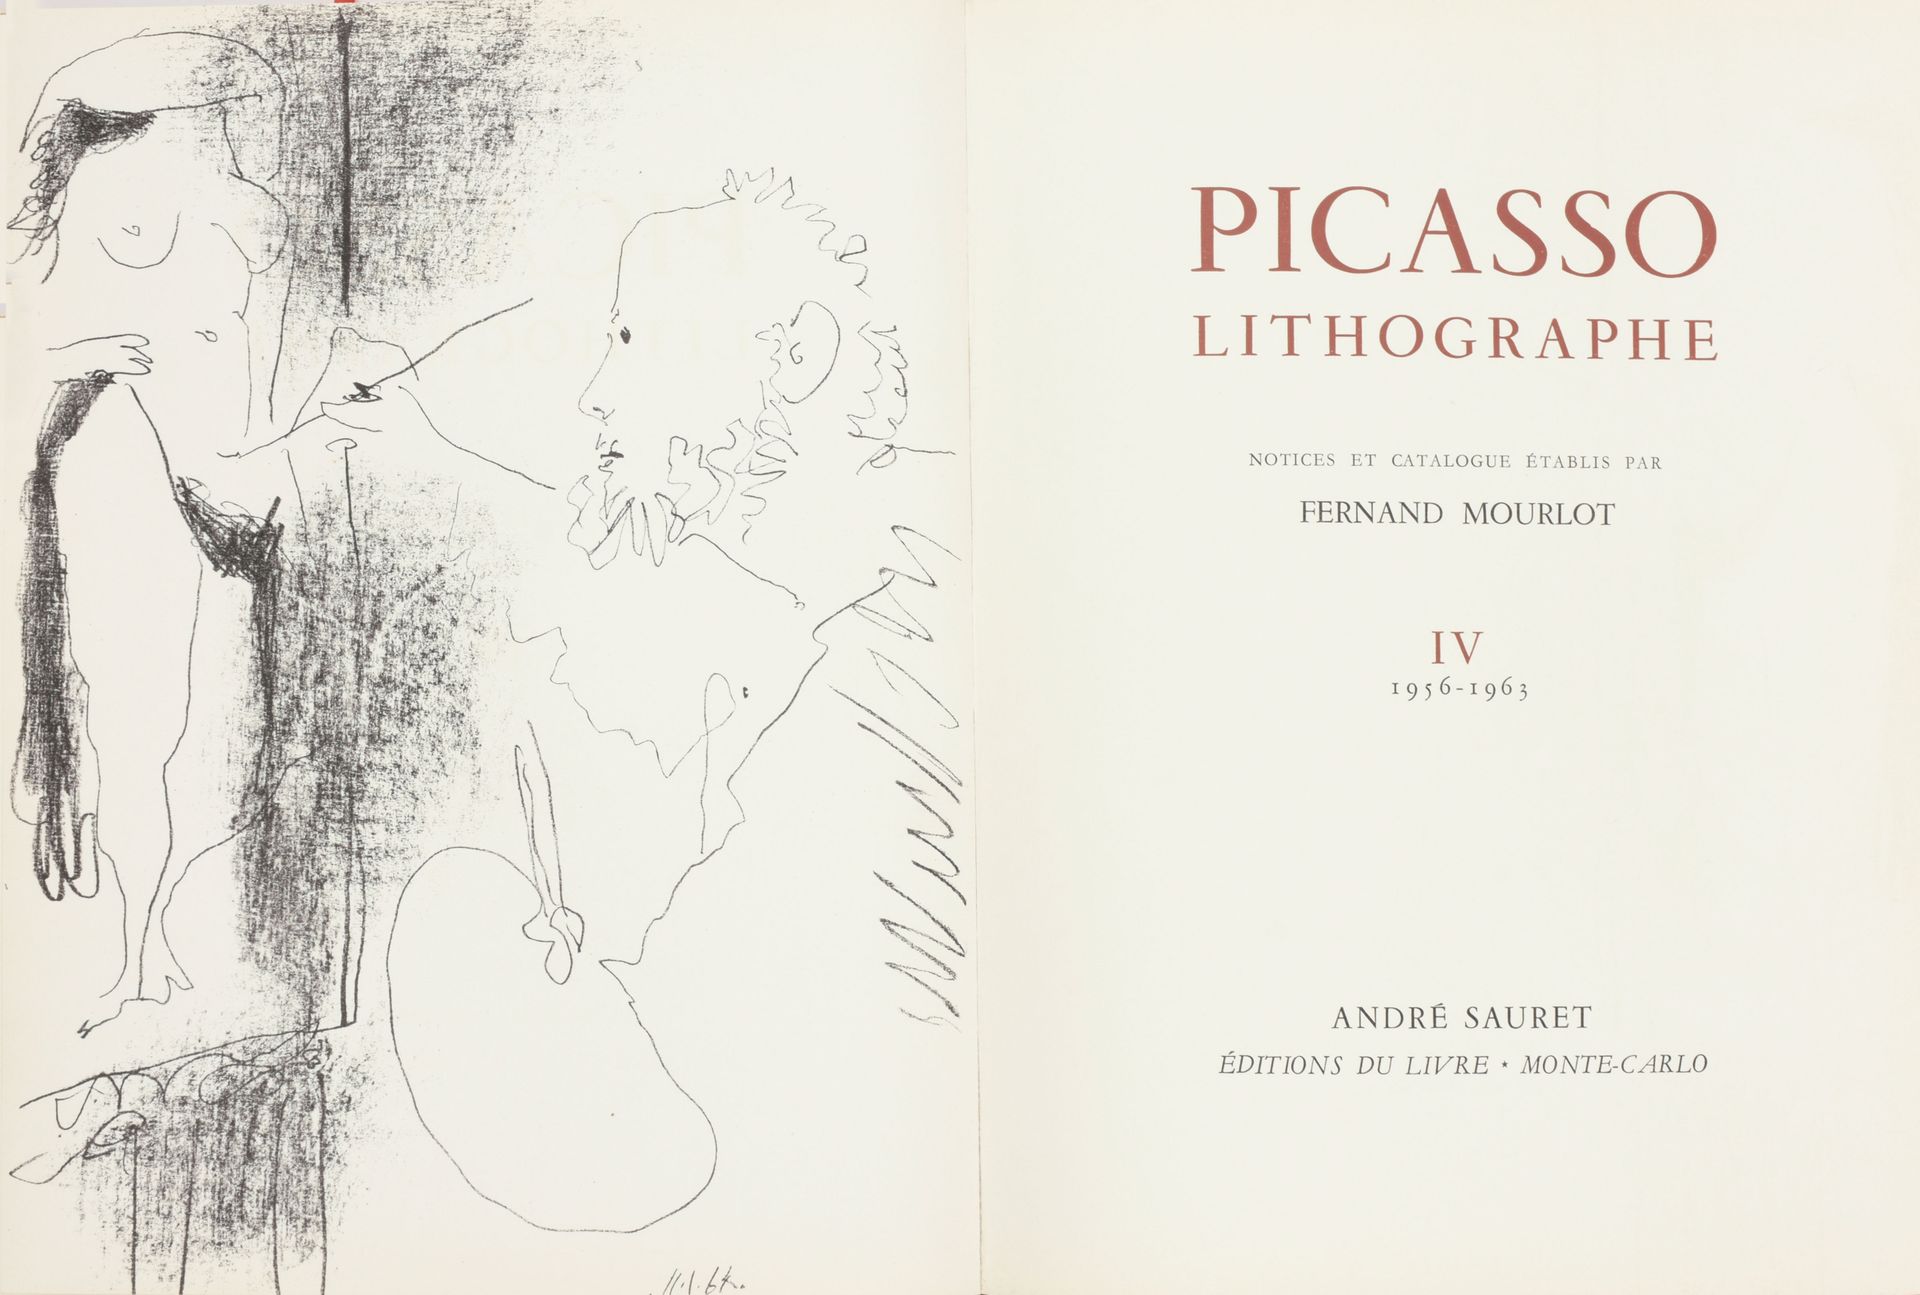 [Picasso] Mourlot, Fernand Picasso-Lithographie Band IV, 1956-1963

Gr. In-4°, K&hellip;